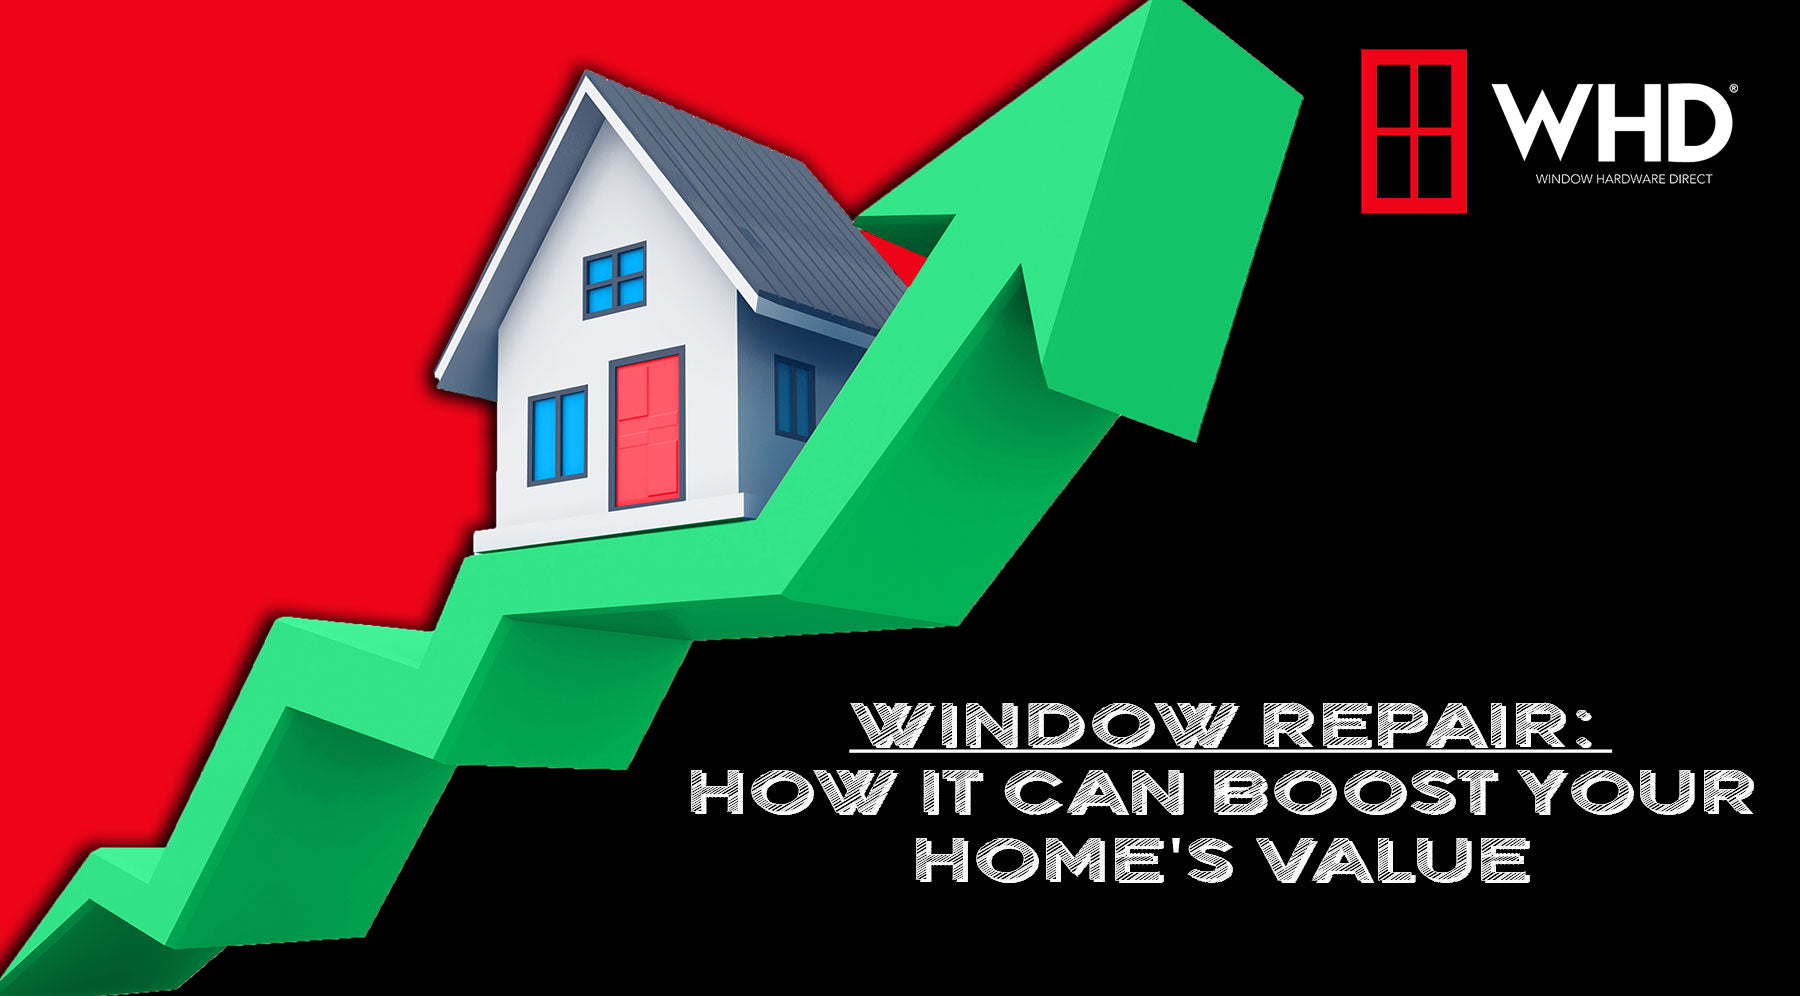 Window Repair: How It Can Boost Your Home's Value and Energy Efficiency